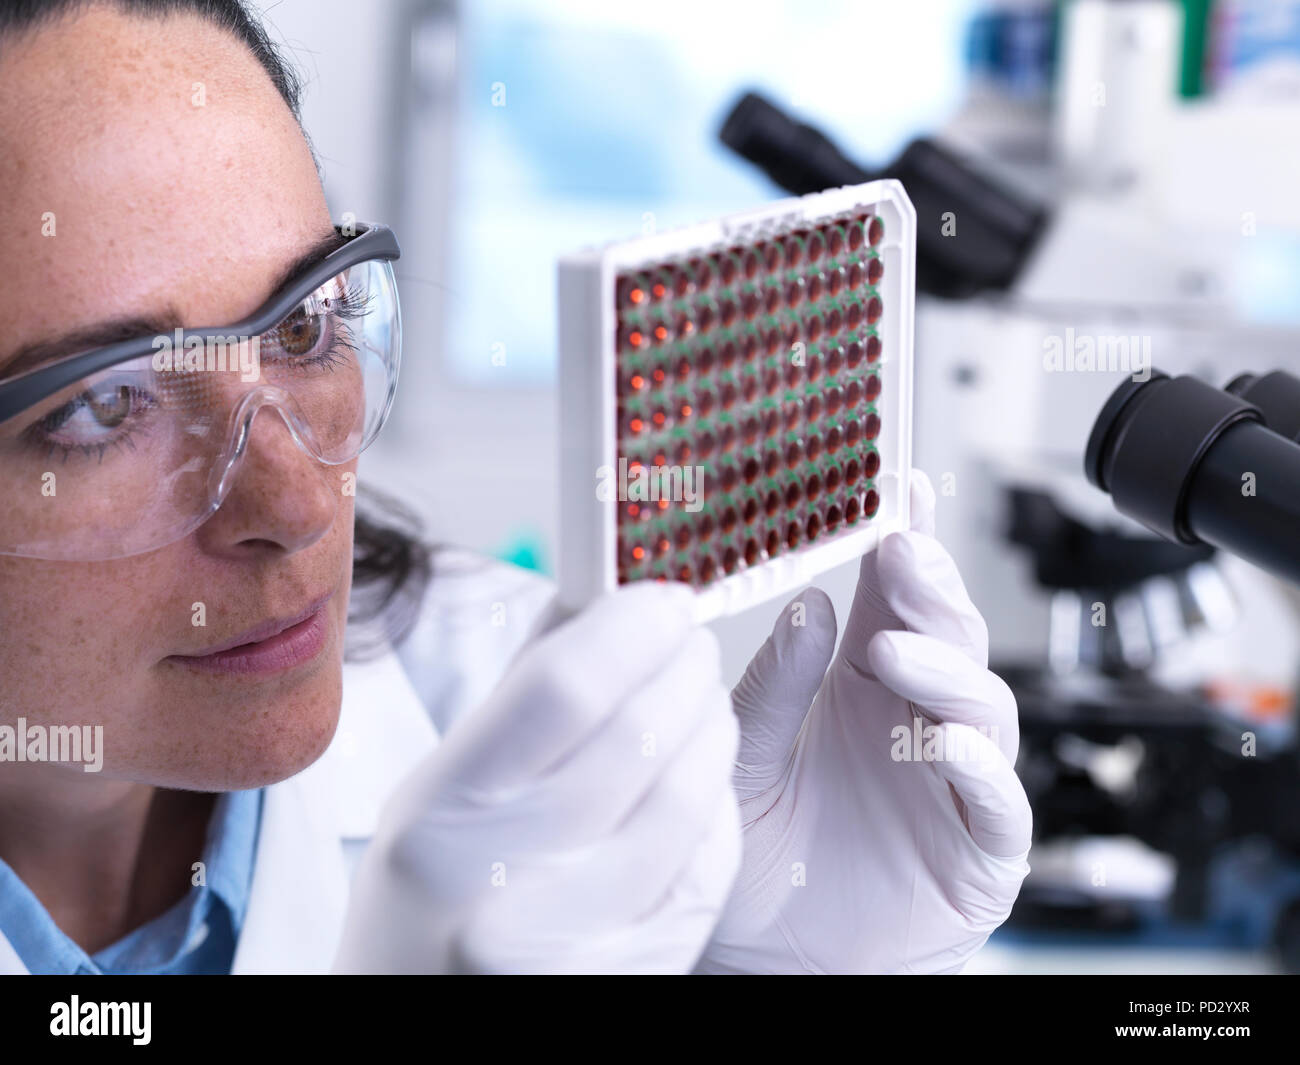 Scientist viewing a multi well plate containing blood samples for screening a laboratory Stock Photo